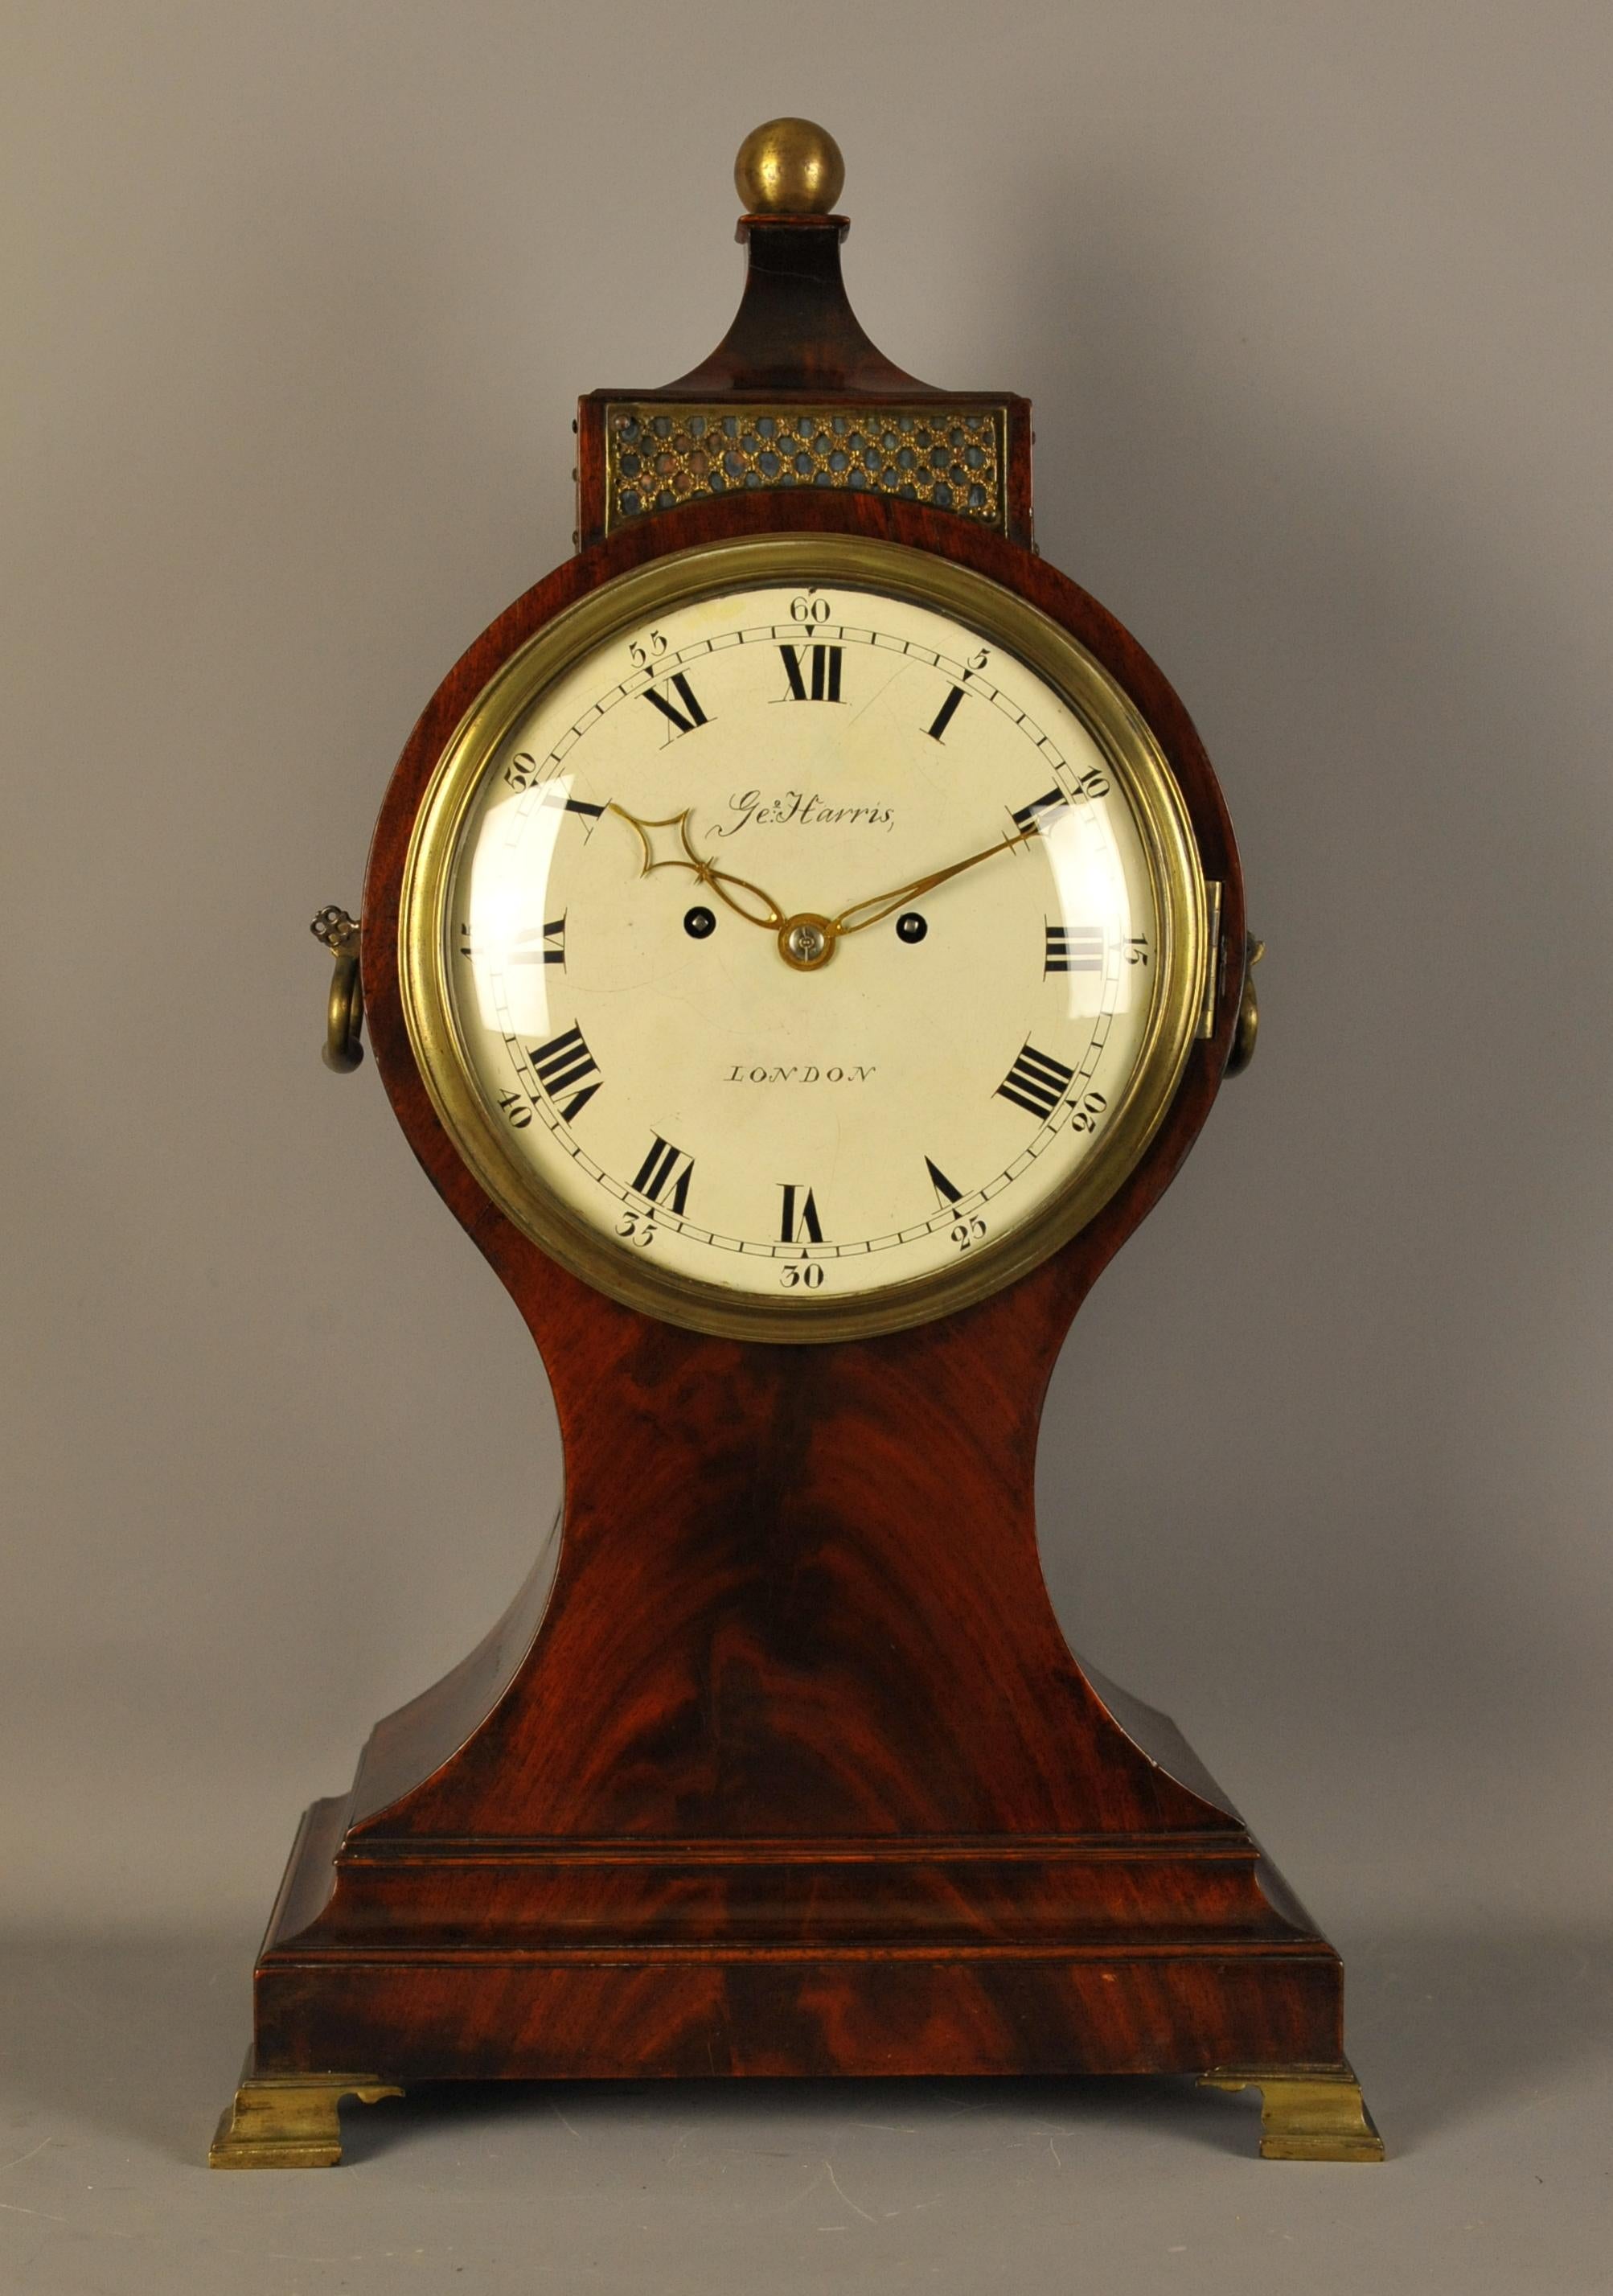 This is a fine and impressive English balloon clock of the very finest quality made, circa 1810 which is in the most wonderful original color. The 8 inch painted dial is signed George Harris London who was probably the retailer.
The substantial